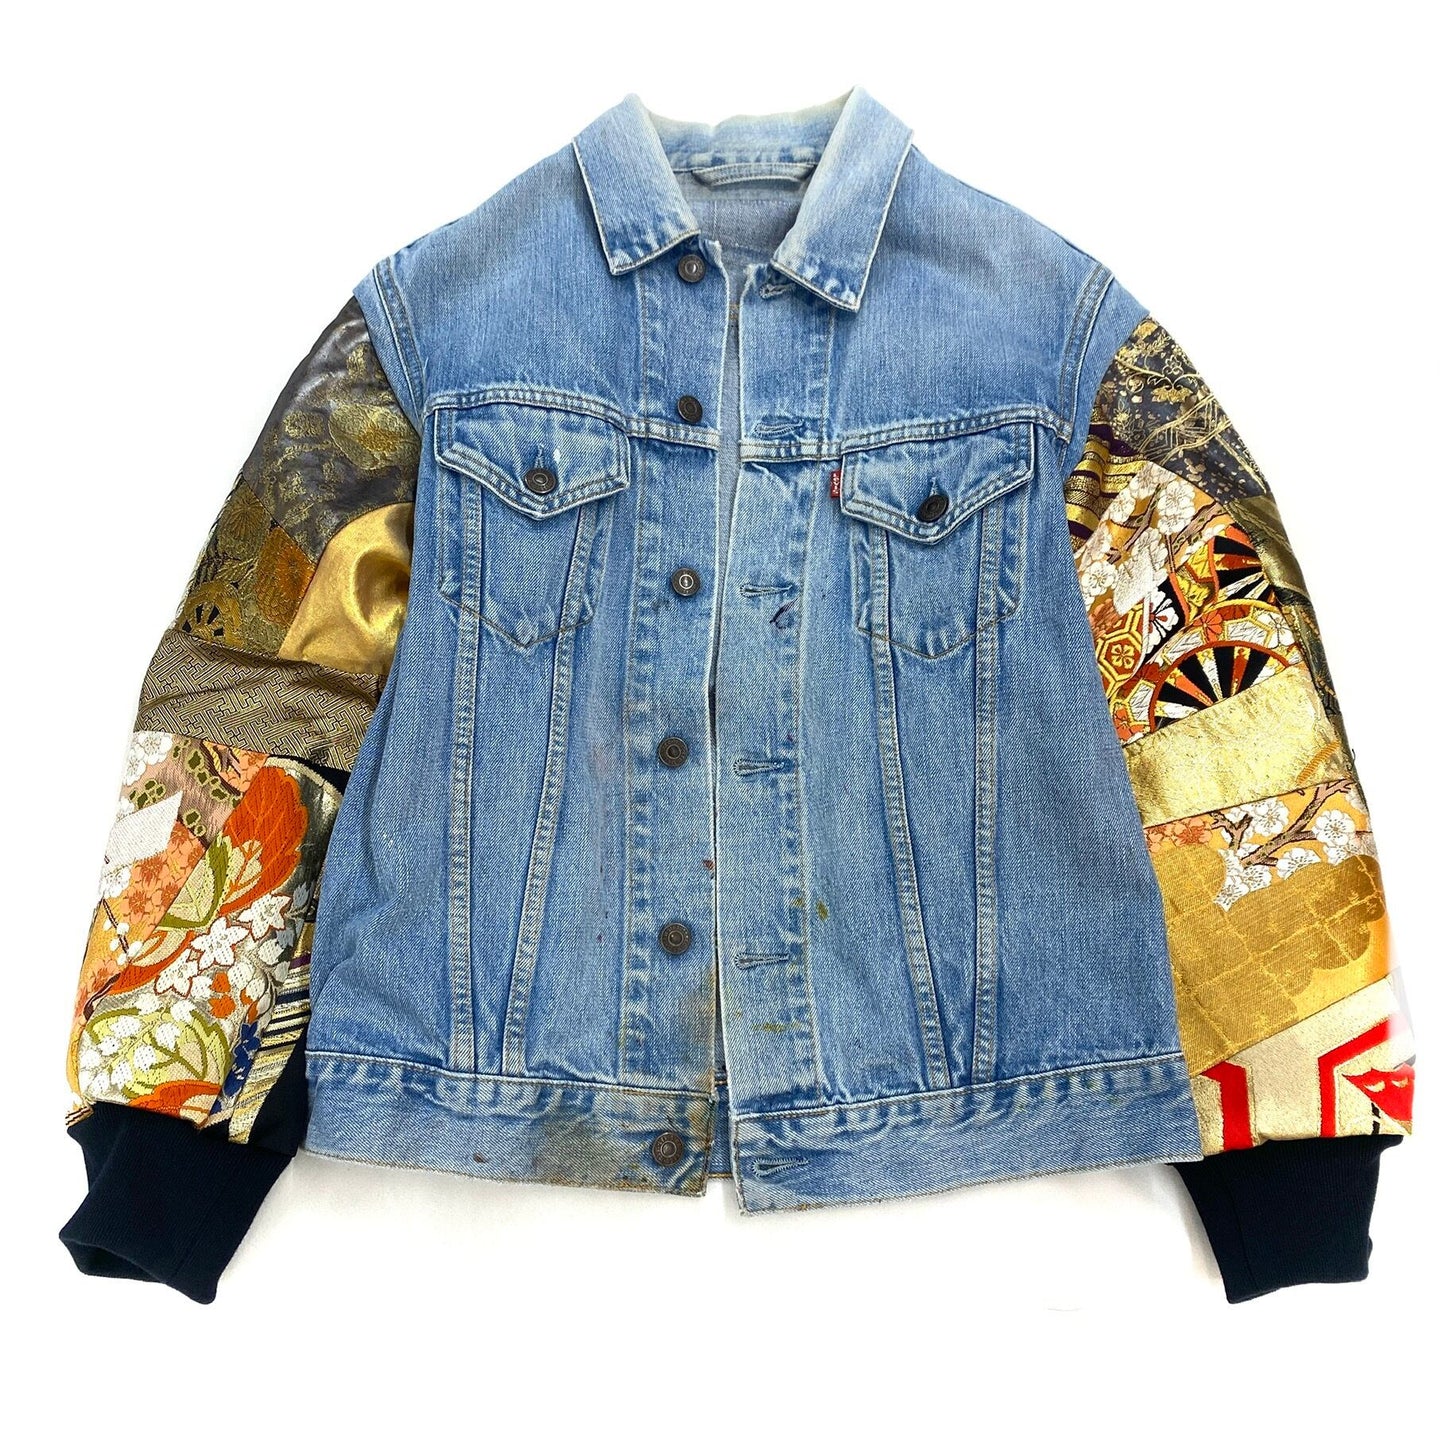 Full Sleeves Wagara Remake Bespoke Japanese Japan Vintage Handmade Custom One and Only One Cote Mer Upcycle Sustainable Street Fashion Embroidered Embroidery Kimono Obi Boro Patchwork x Bleached Denim Jacket ( Size : L )